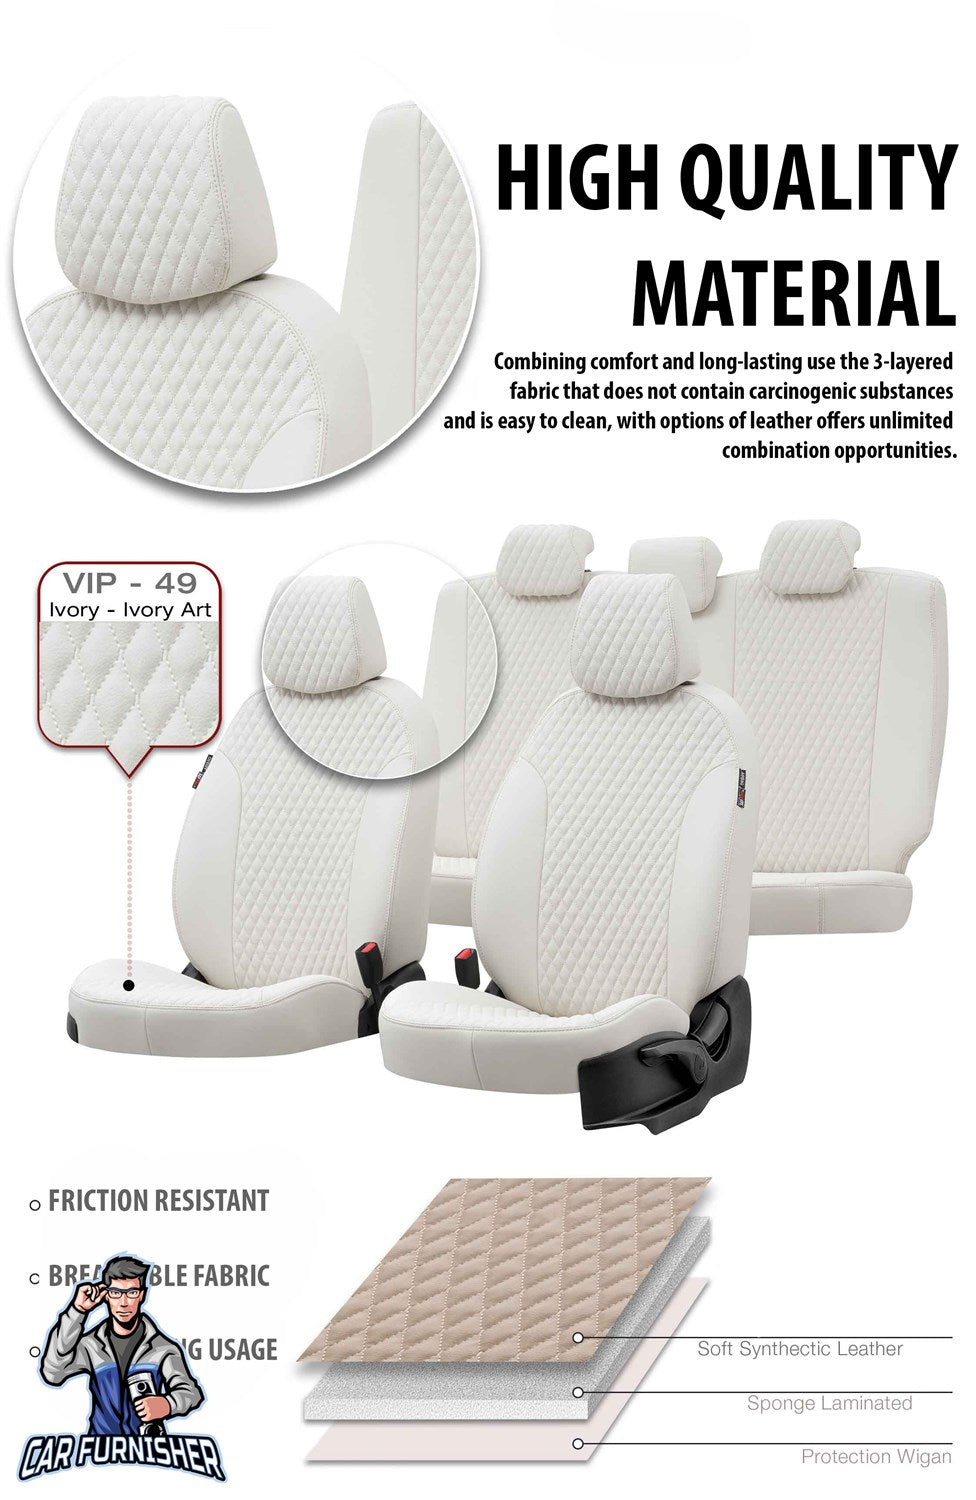 Fiat Scudo Seat Covers Amsterdam Leather Design Ivory Leather